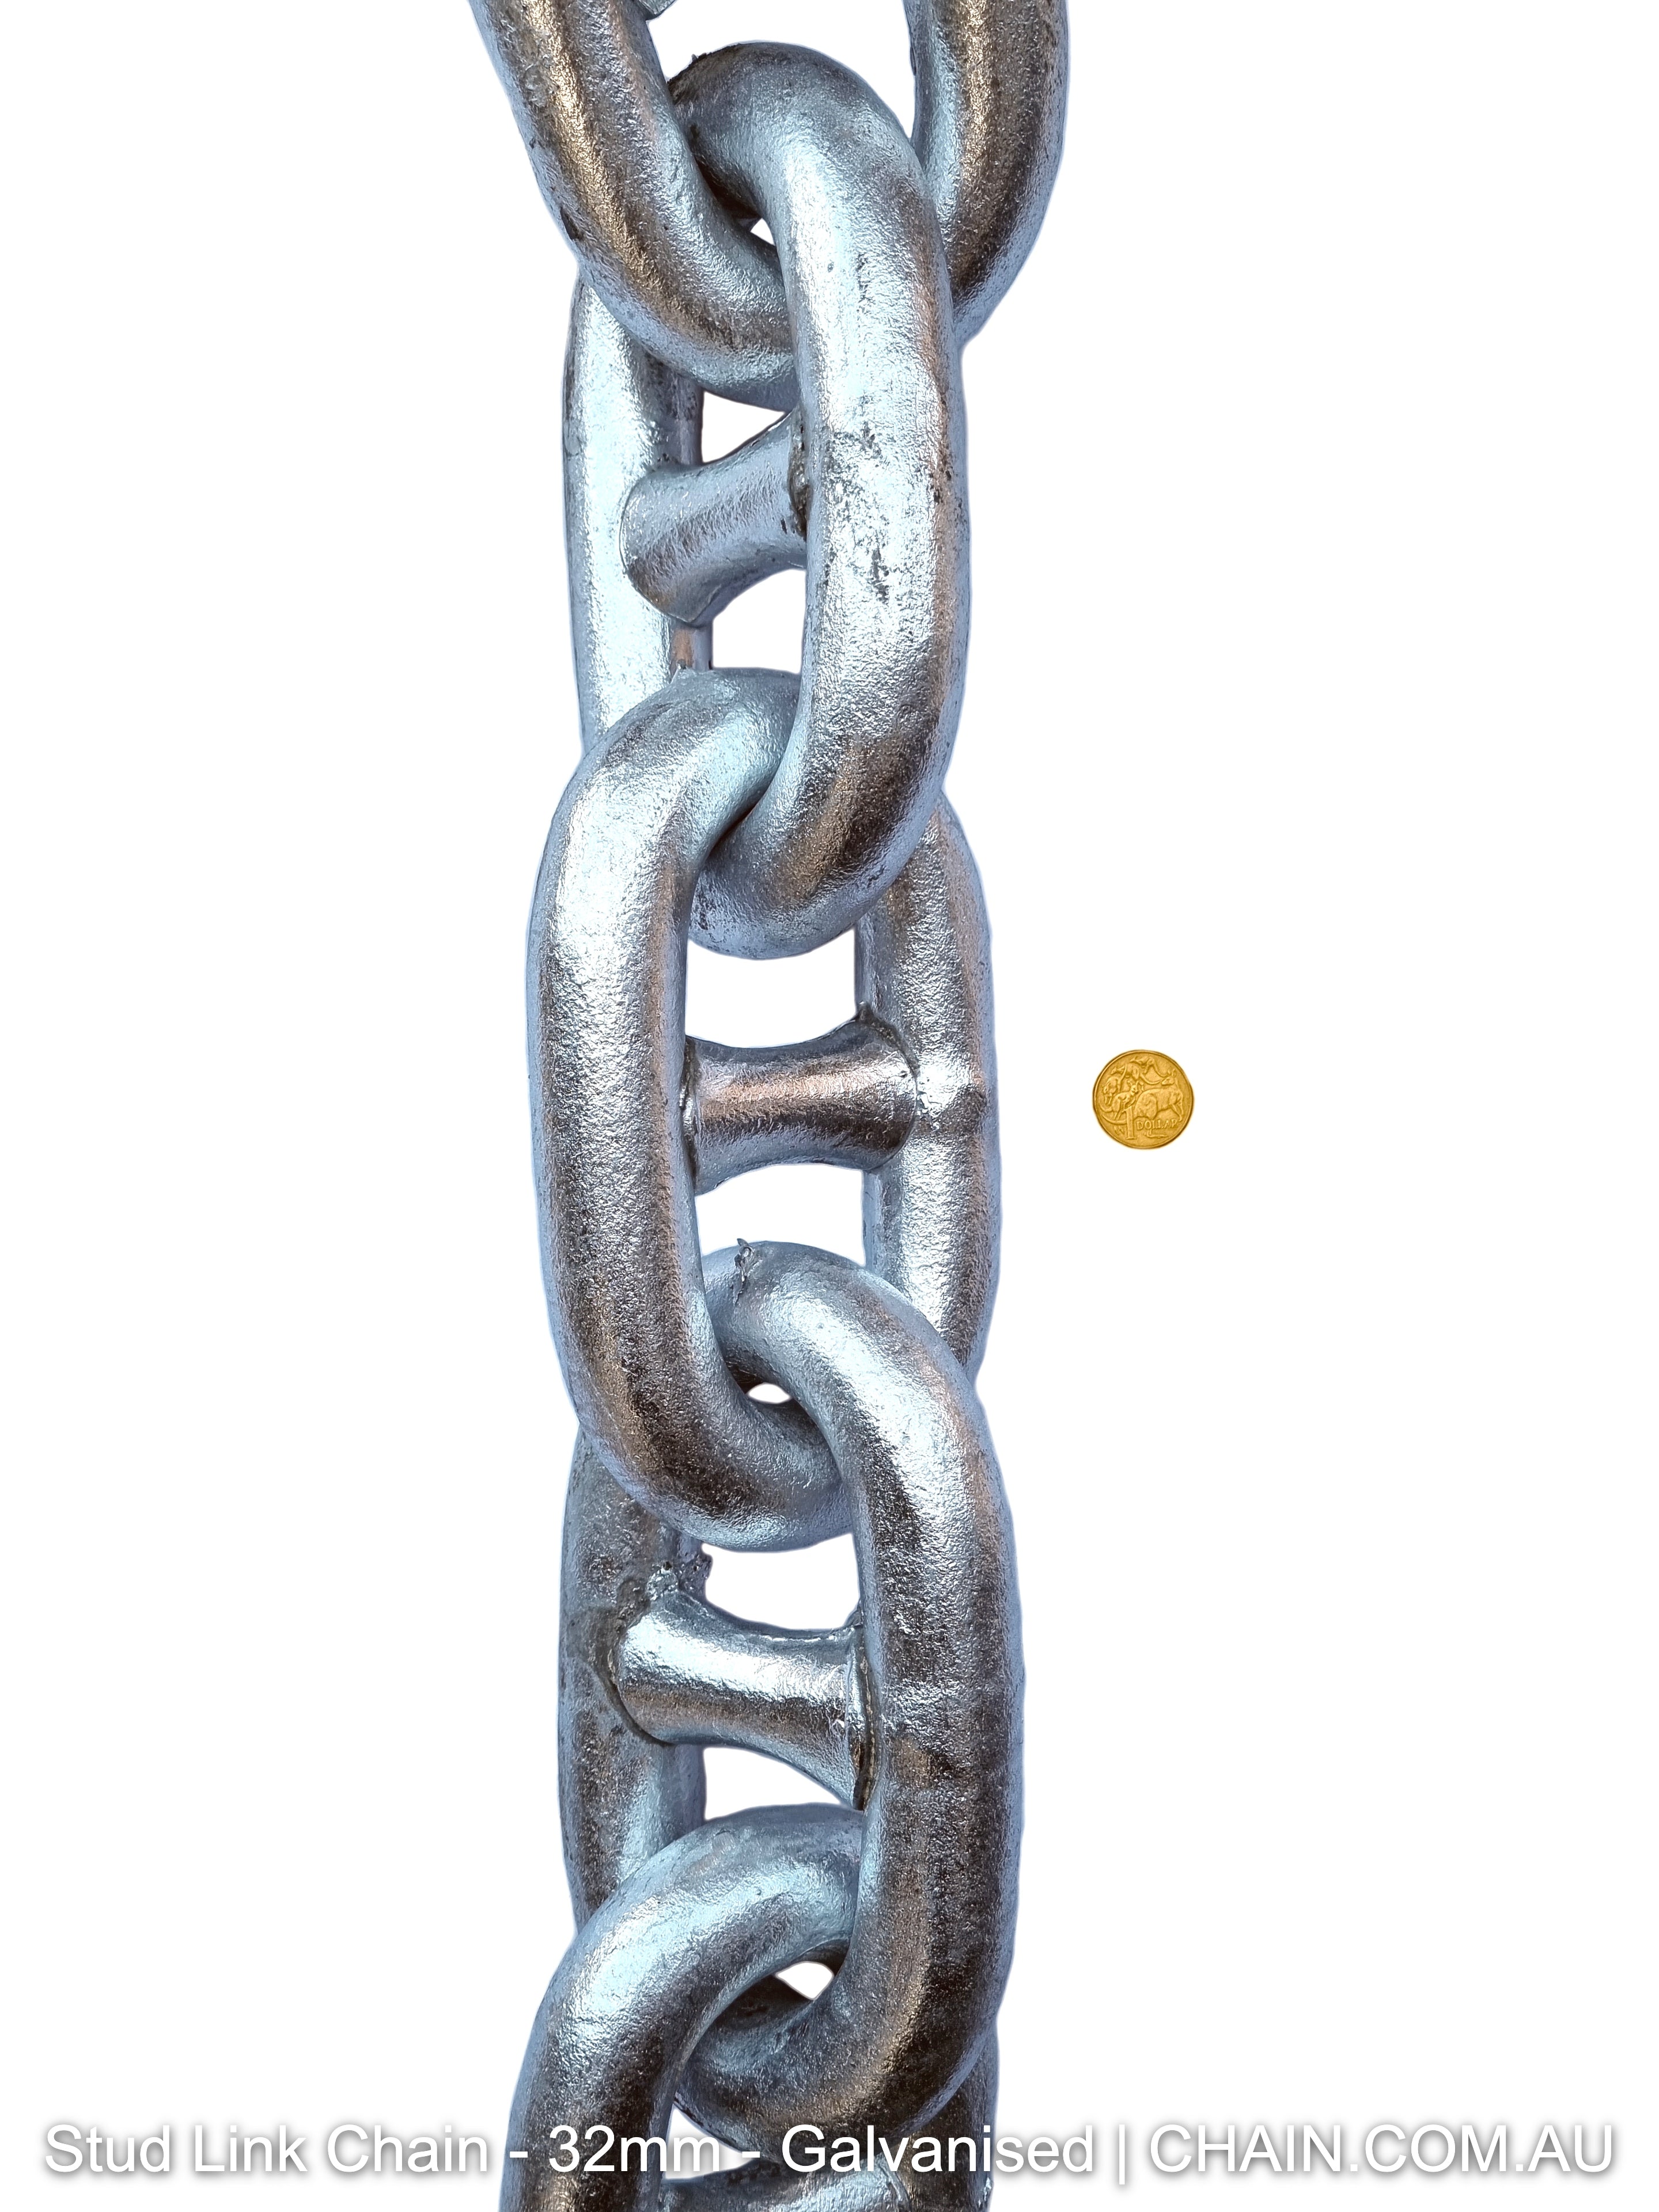 Stud Link Chain - 32mm - Galvanised - EMAIL or CALL TO ORDER